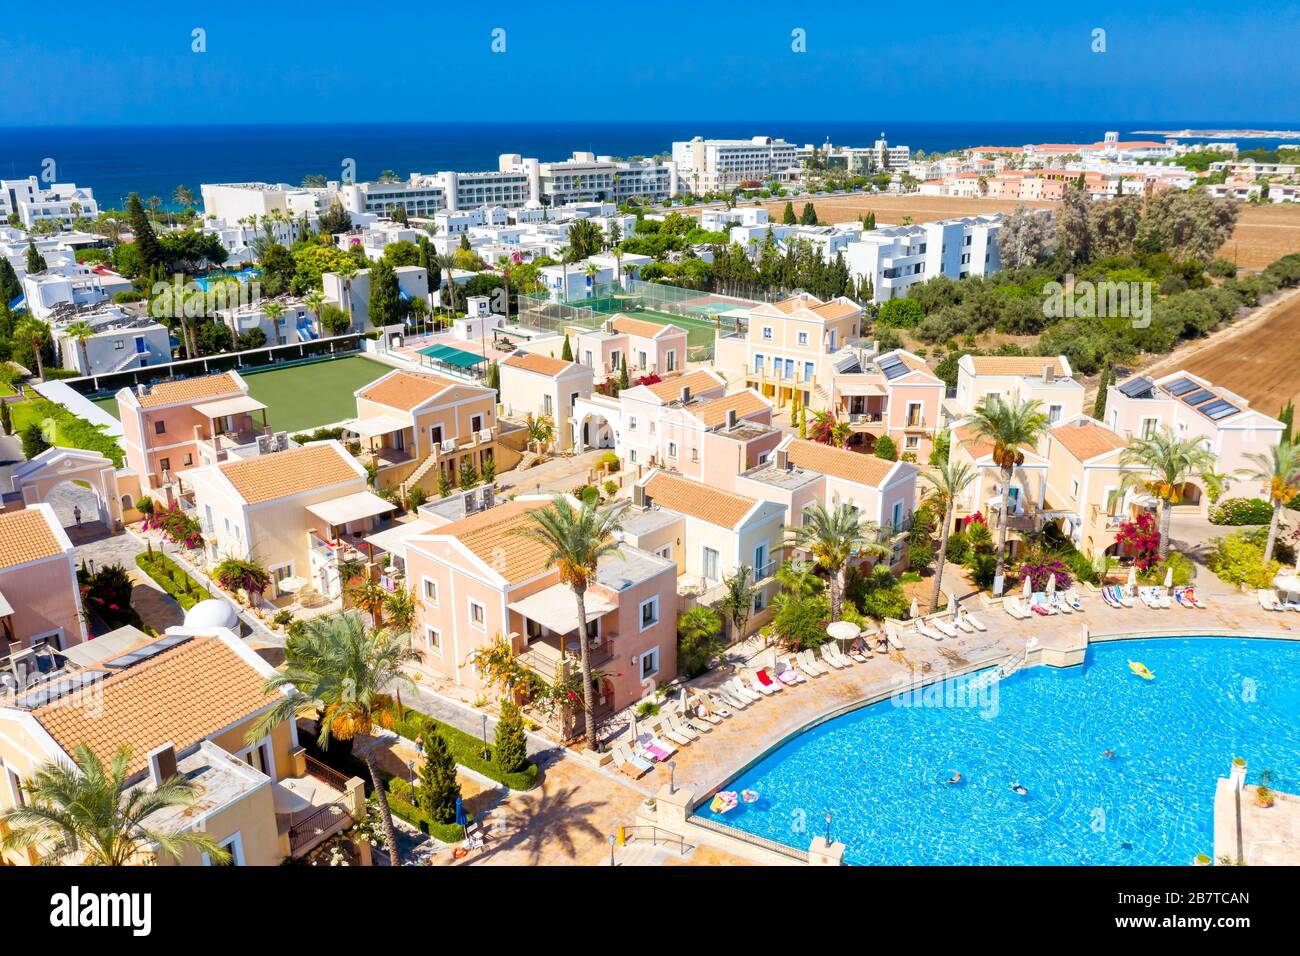 Aerial view of villas and hotels in Pafos, Cyprus Stock Photo